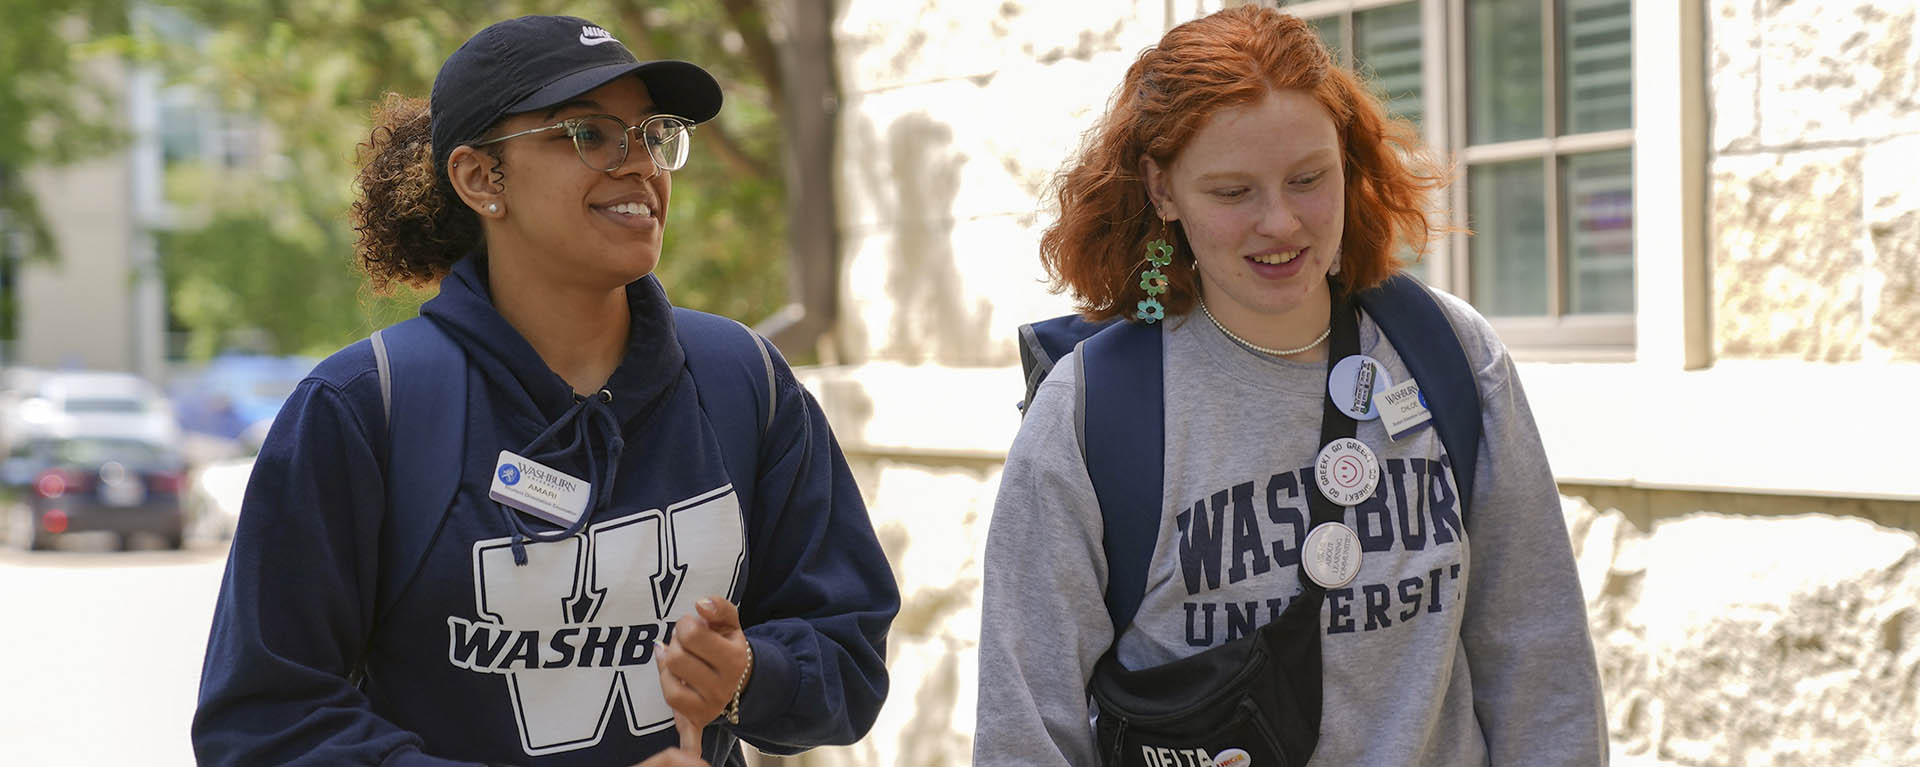 Two tour guides chat while walking on campus.